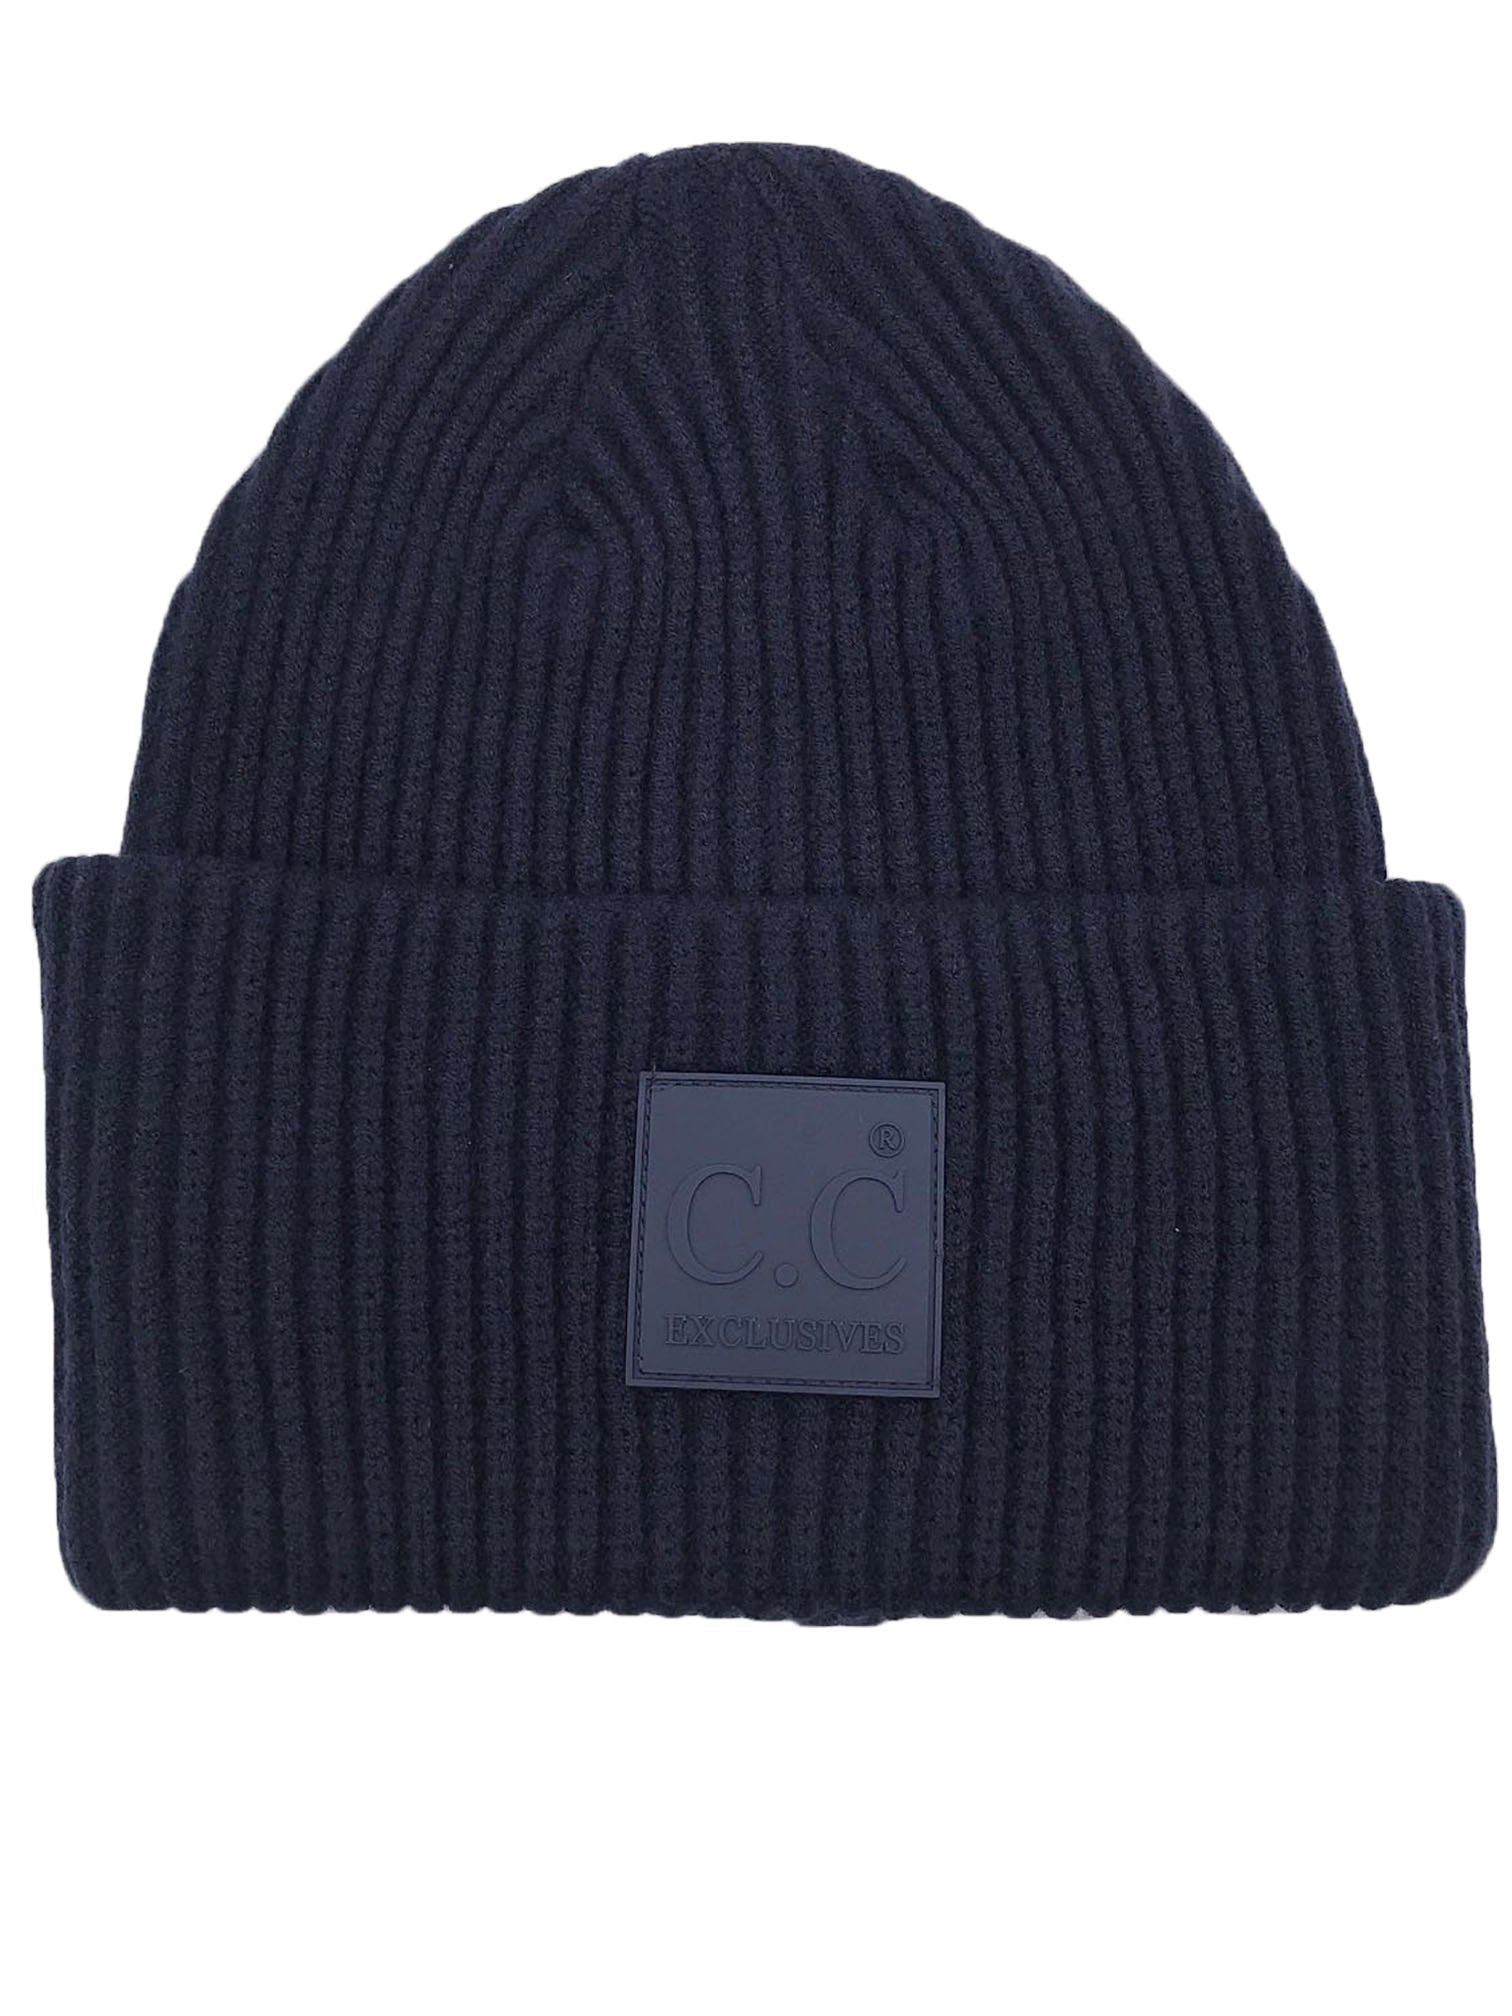 HAT-7007 Beanie with Rubber Patch Navy